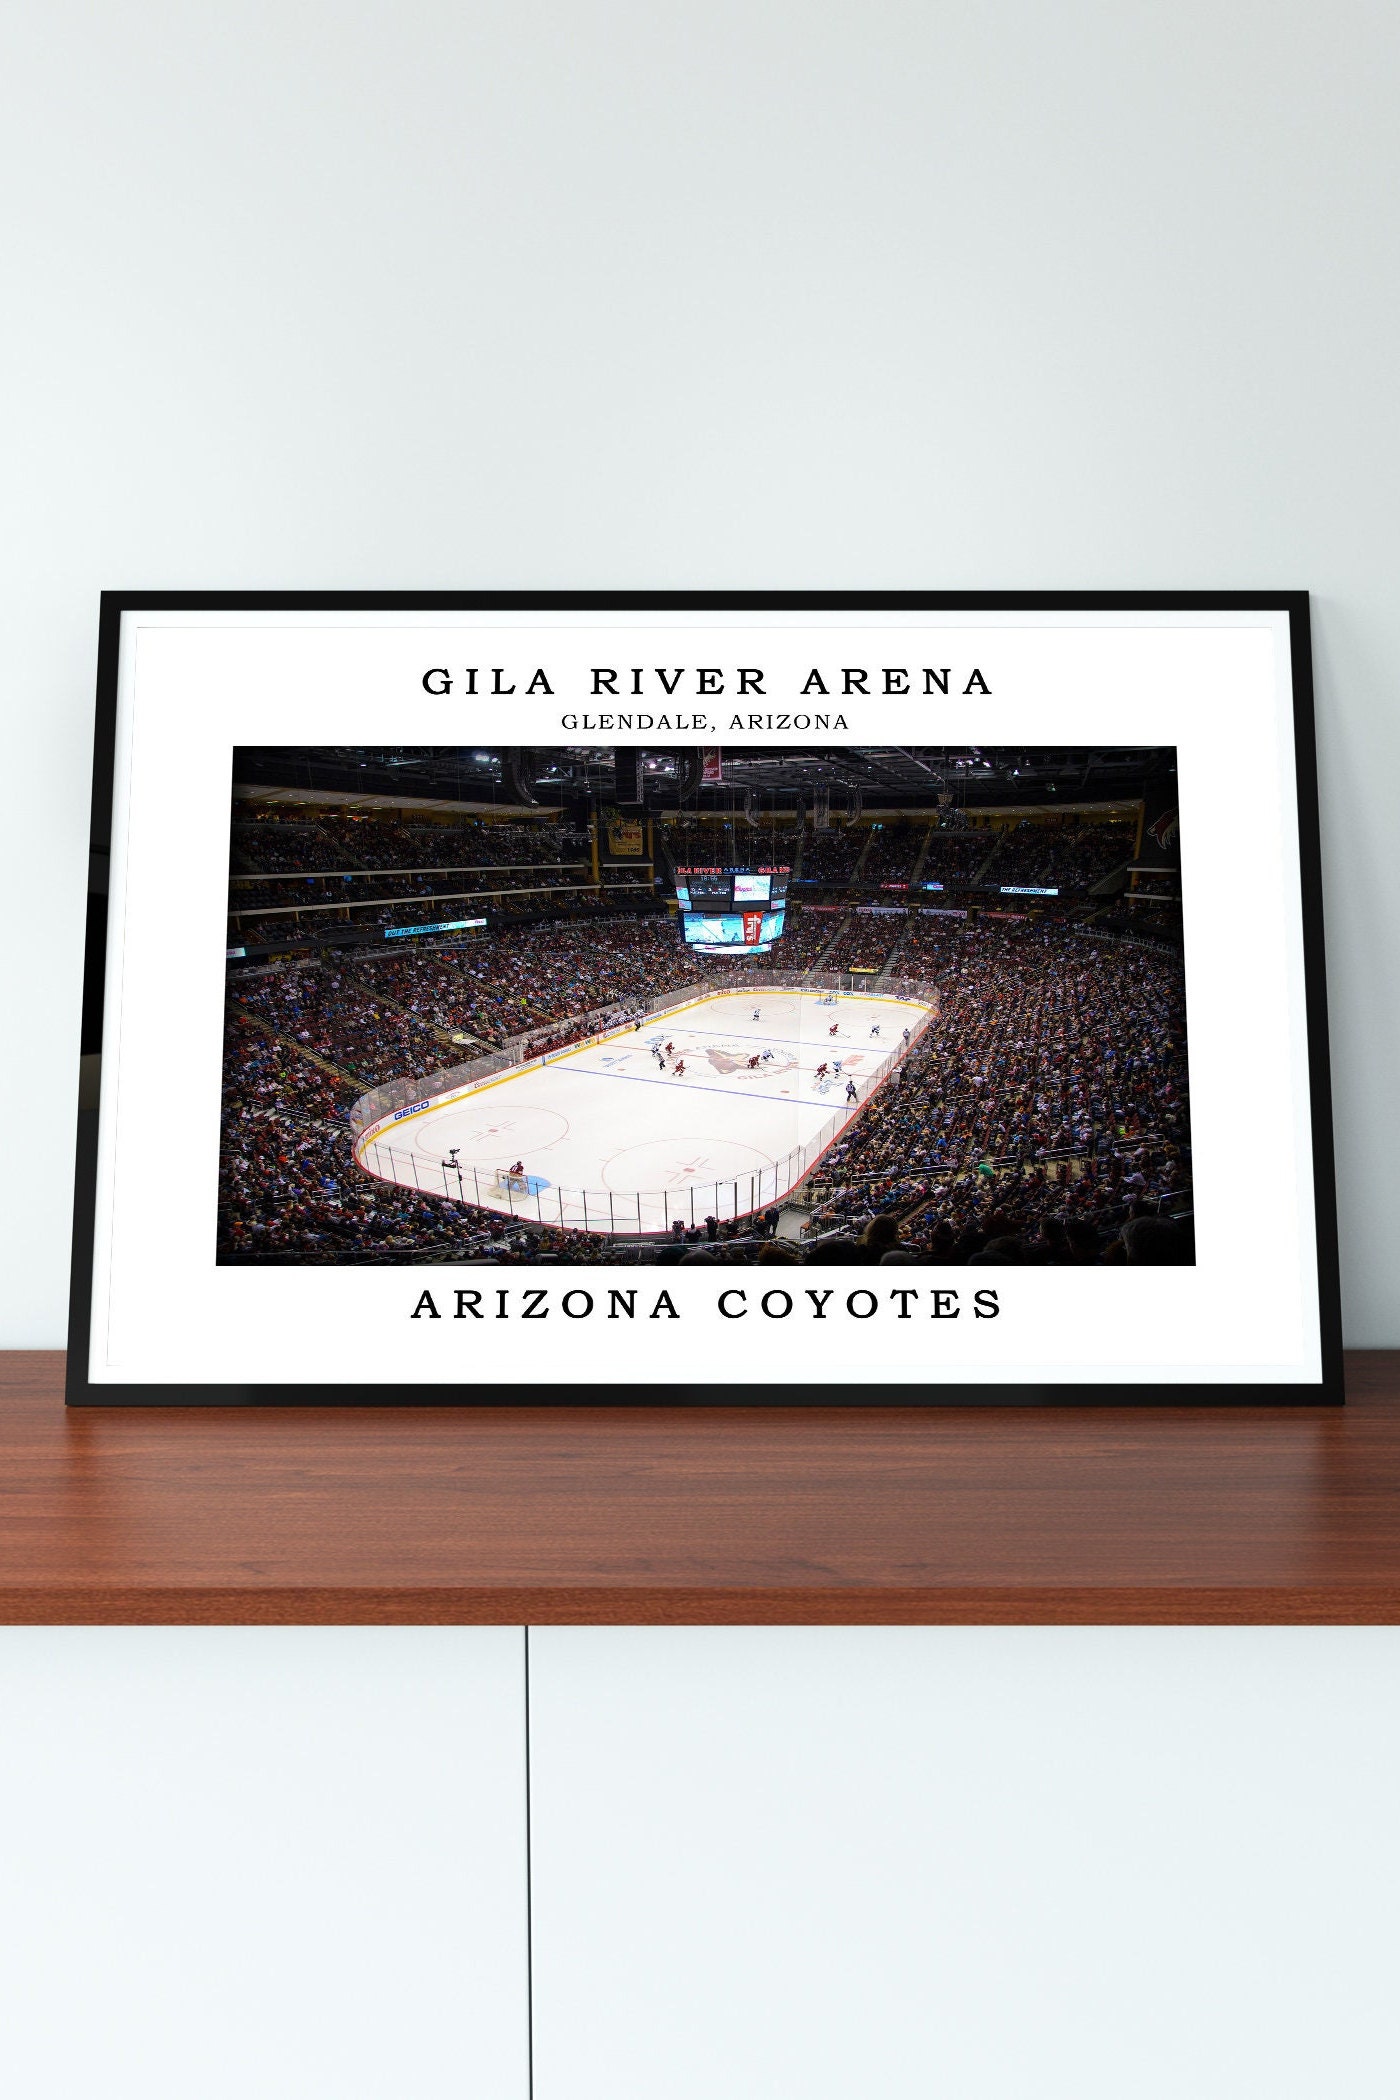 Road Review: Gila River Arena, A Possible Neutral Site For 2020